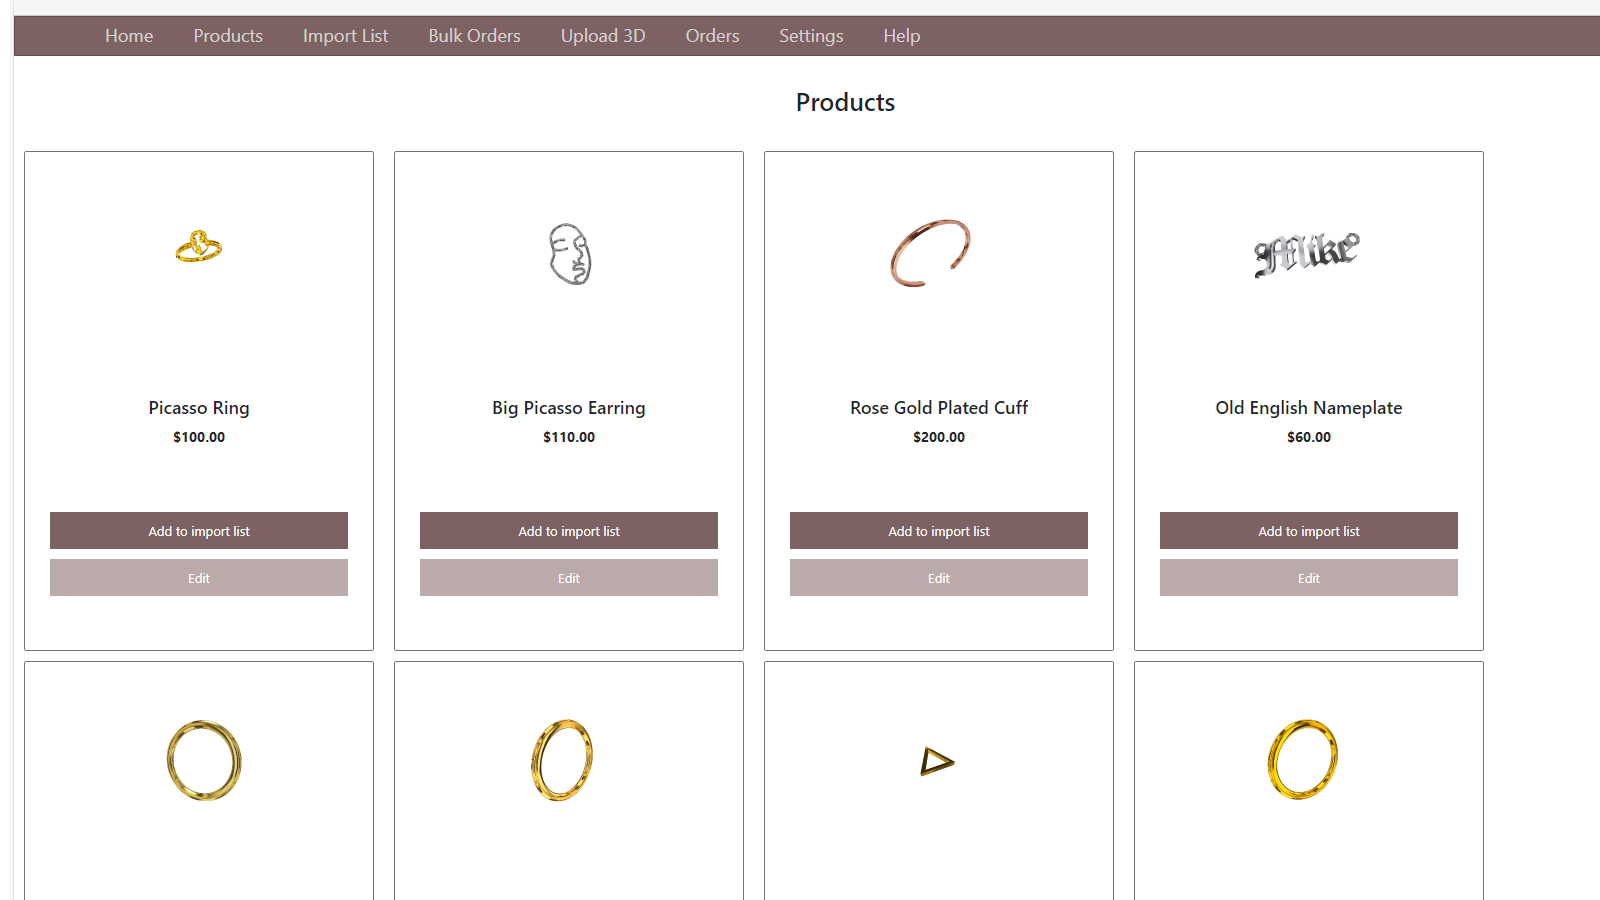 Products page